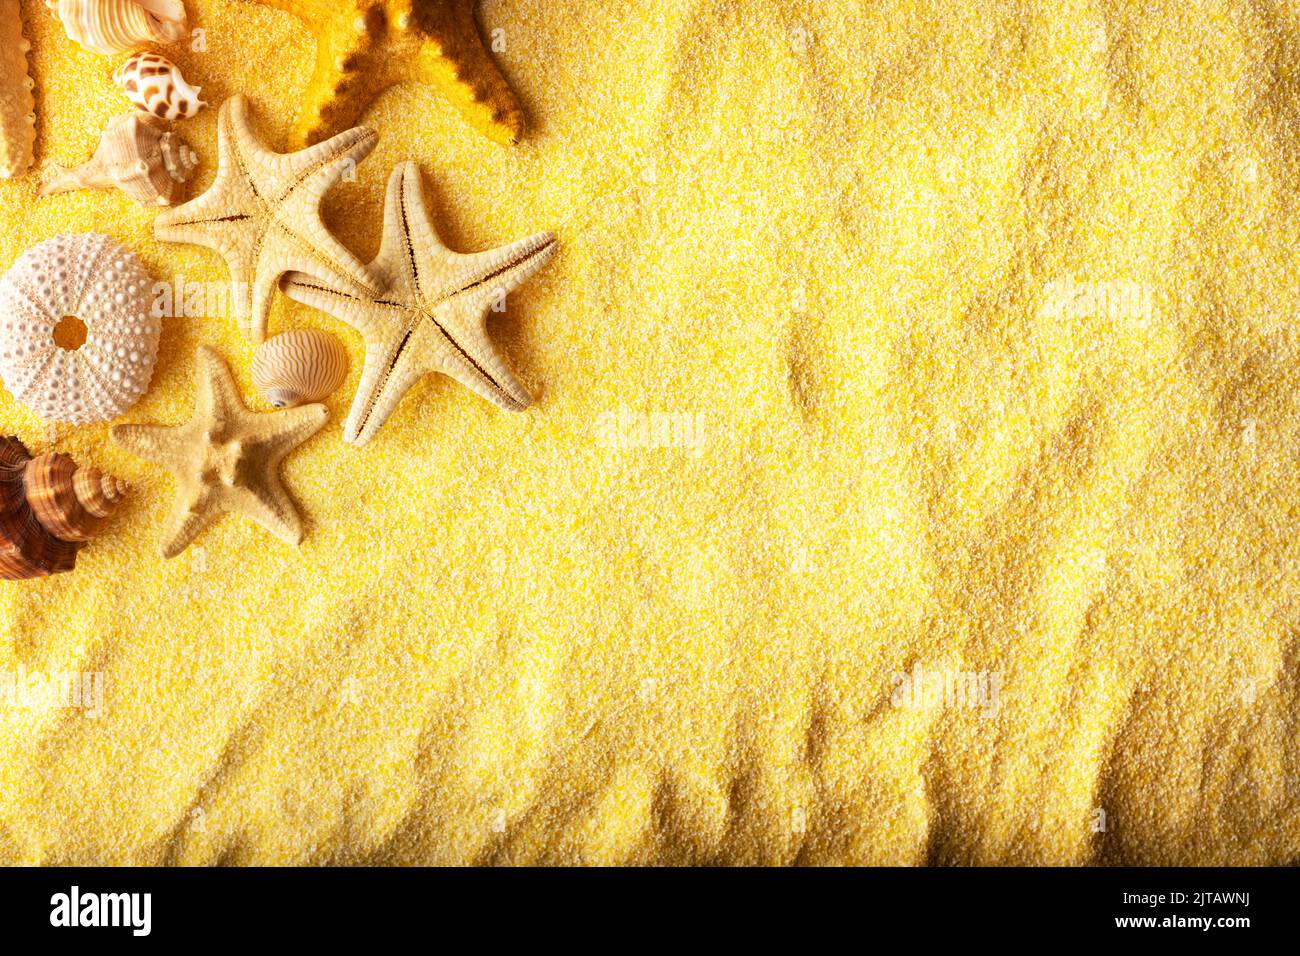 Vacations and summer time concept with starfish and sea shells on a clear yellow beach sand. Sea and ocean vacation background Stock Photo